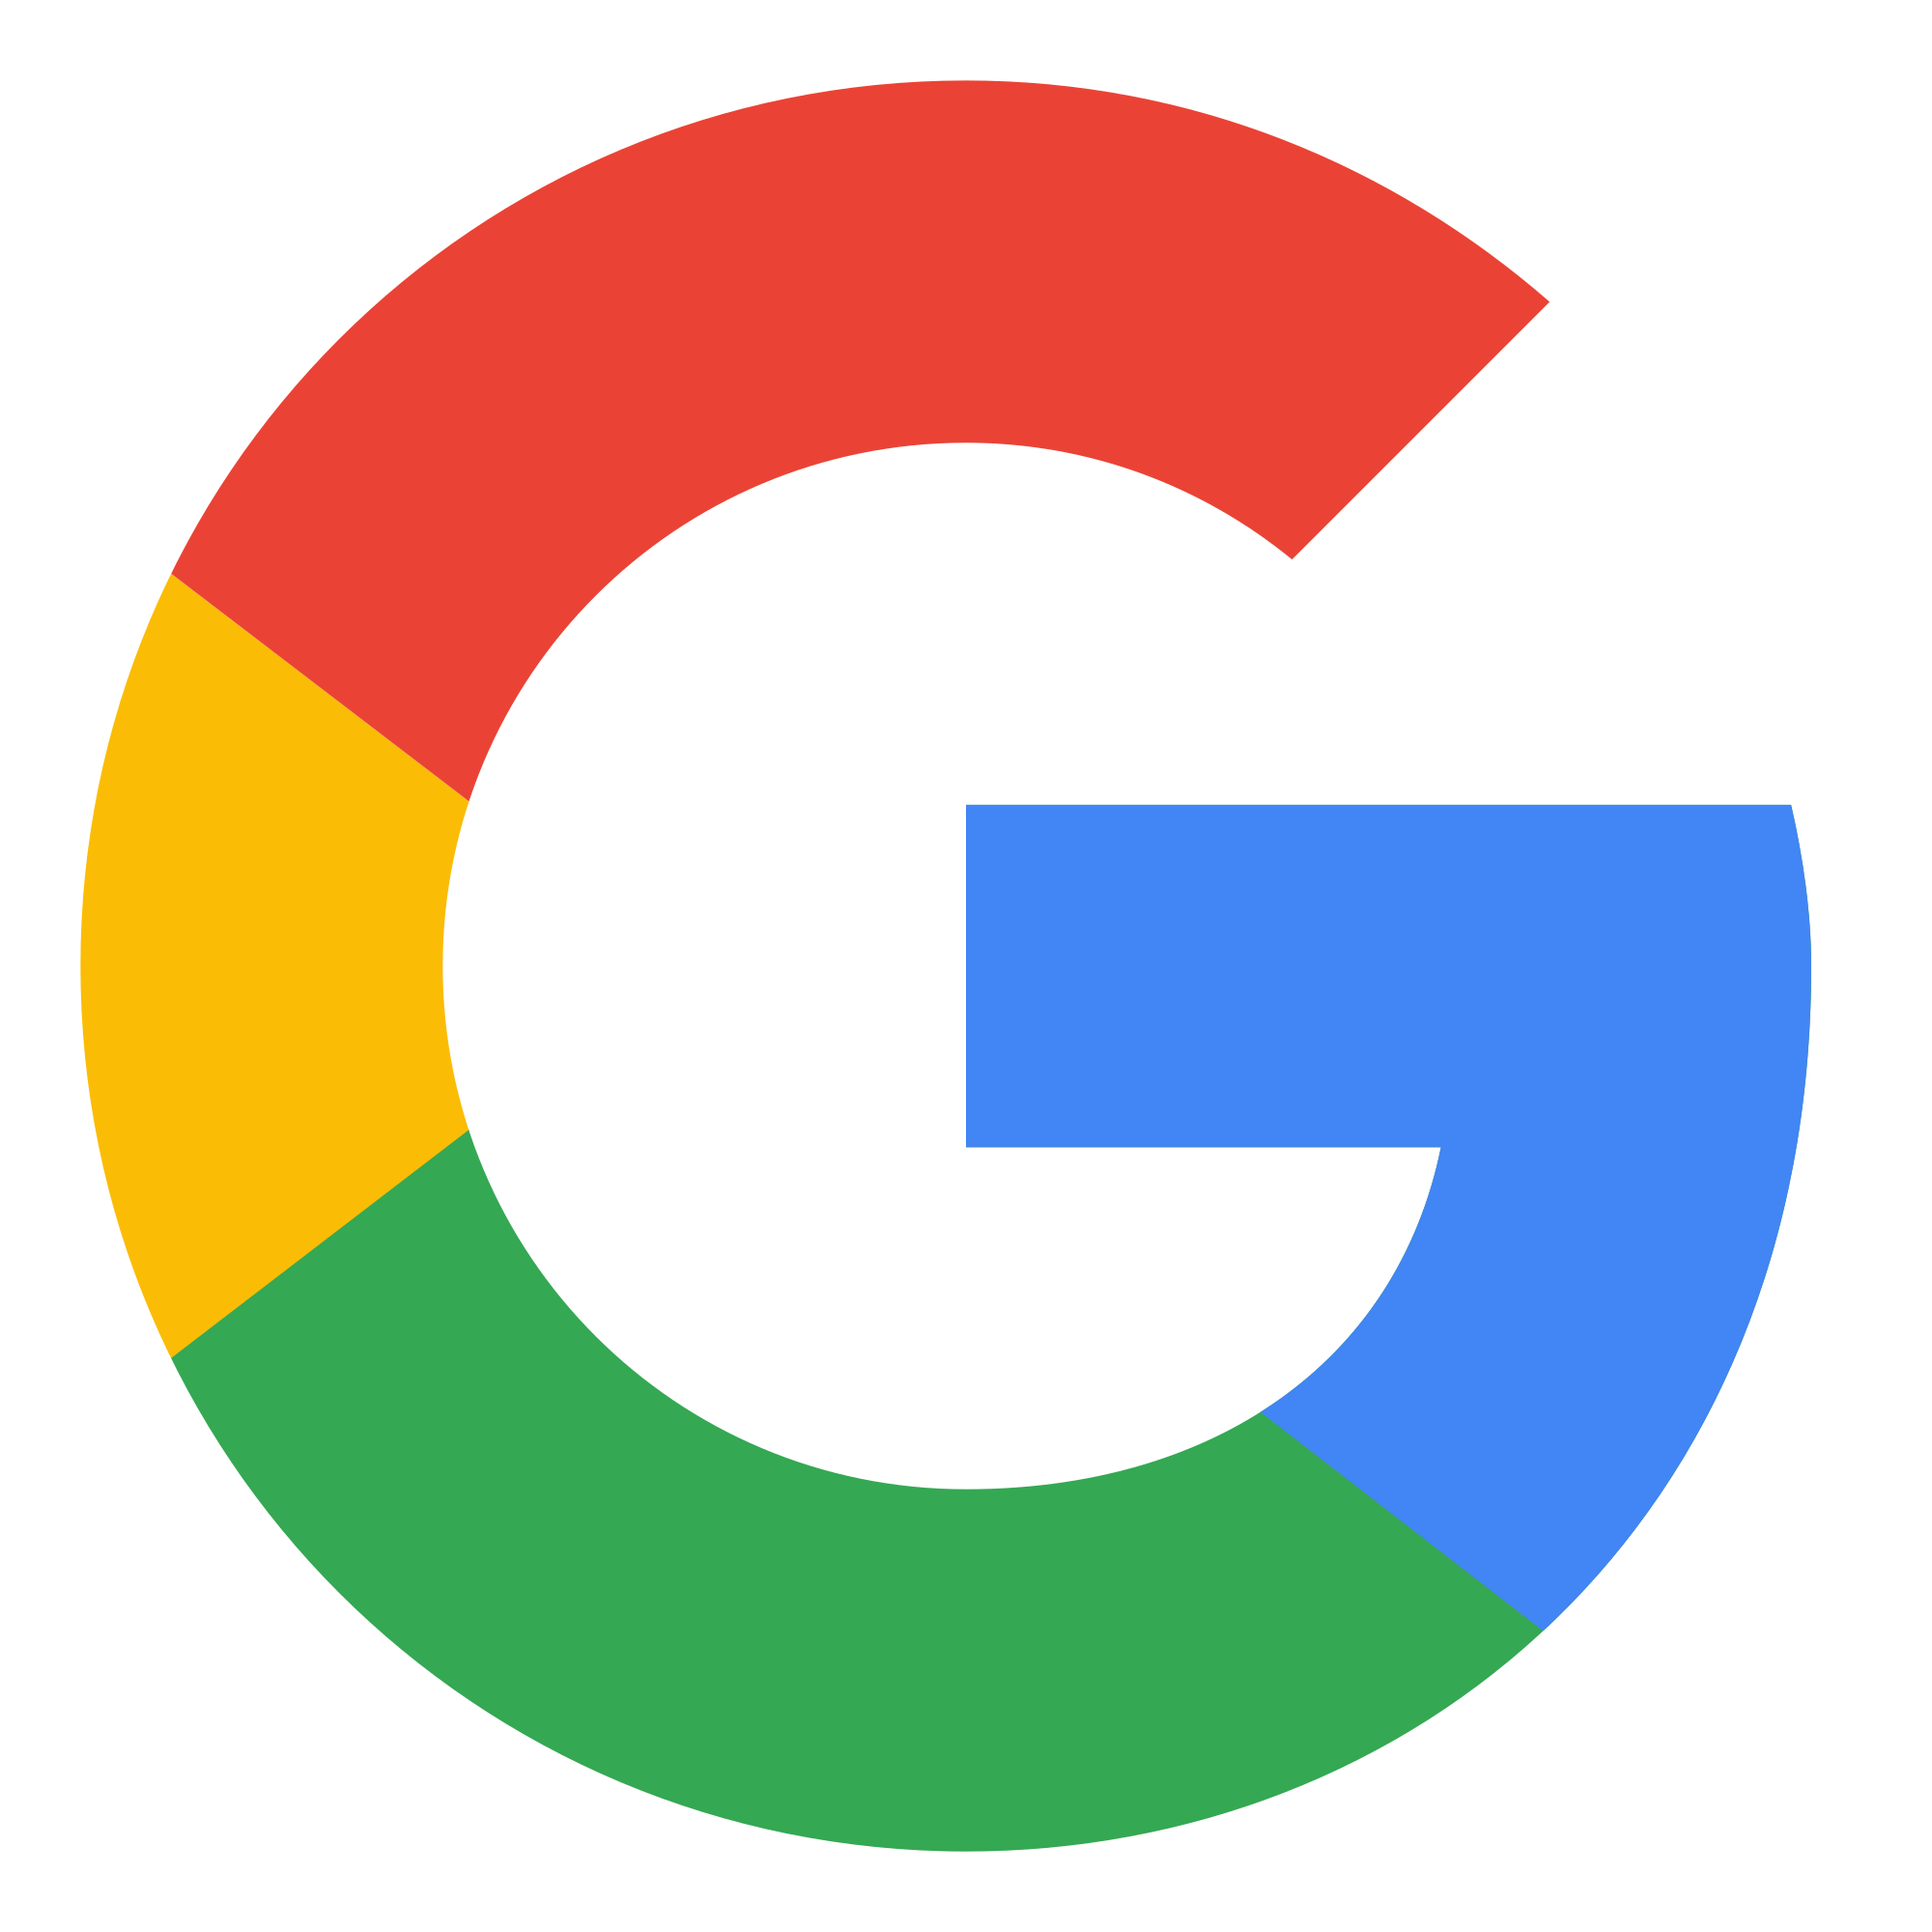 Google icon in four colors, red, yellow, green, and blue